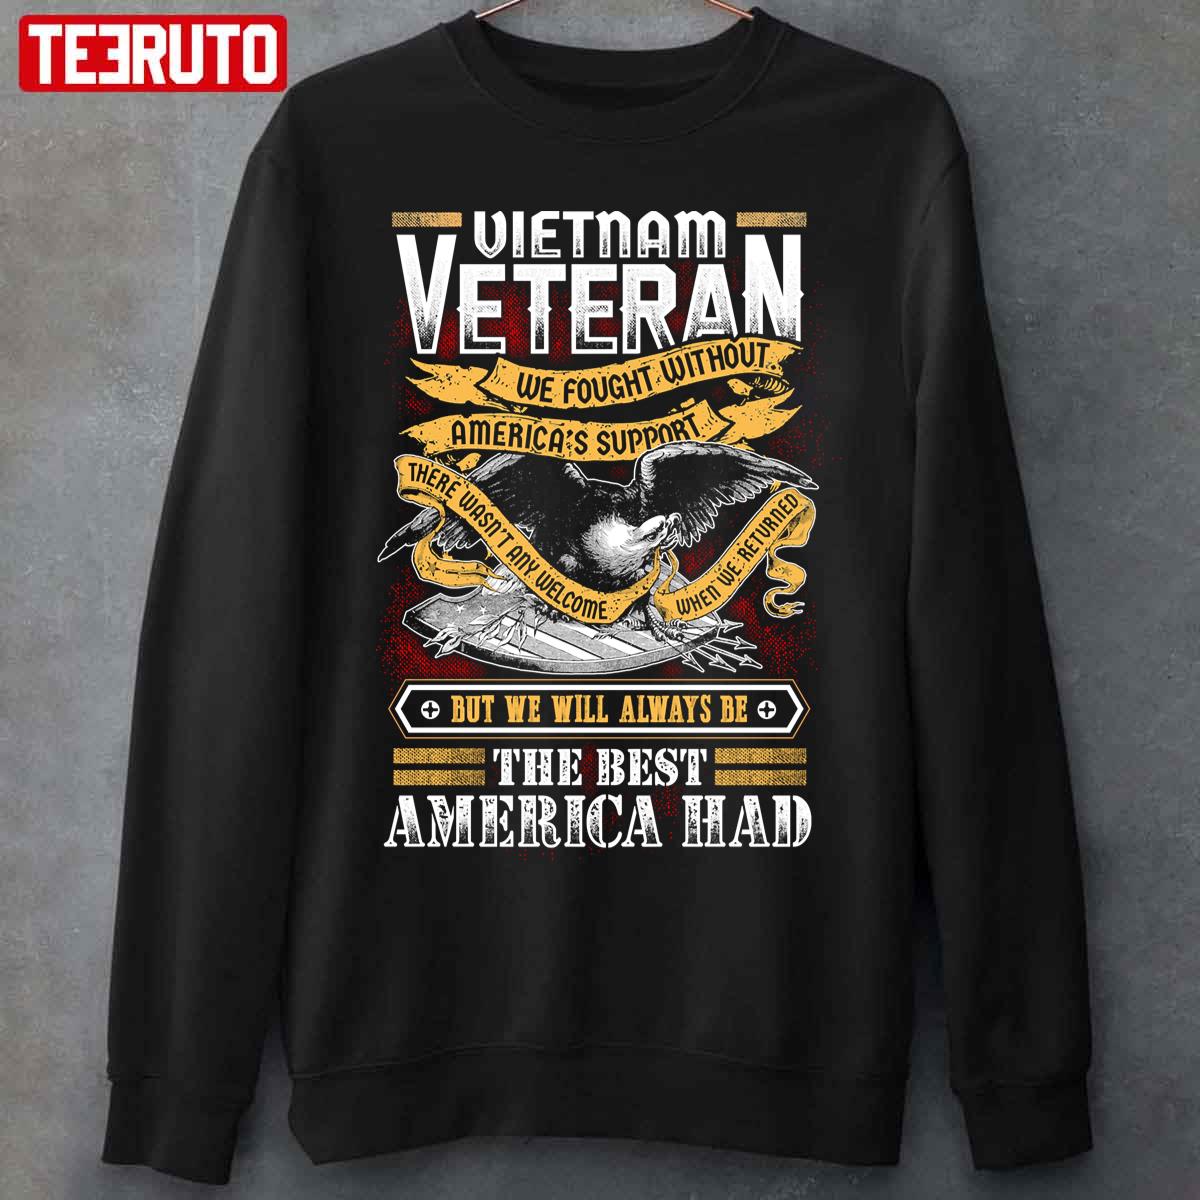 Vietnam Veteran We Fought Without America’s Support Unisex T-Shirt